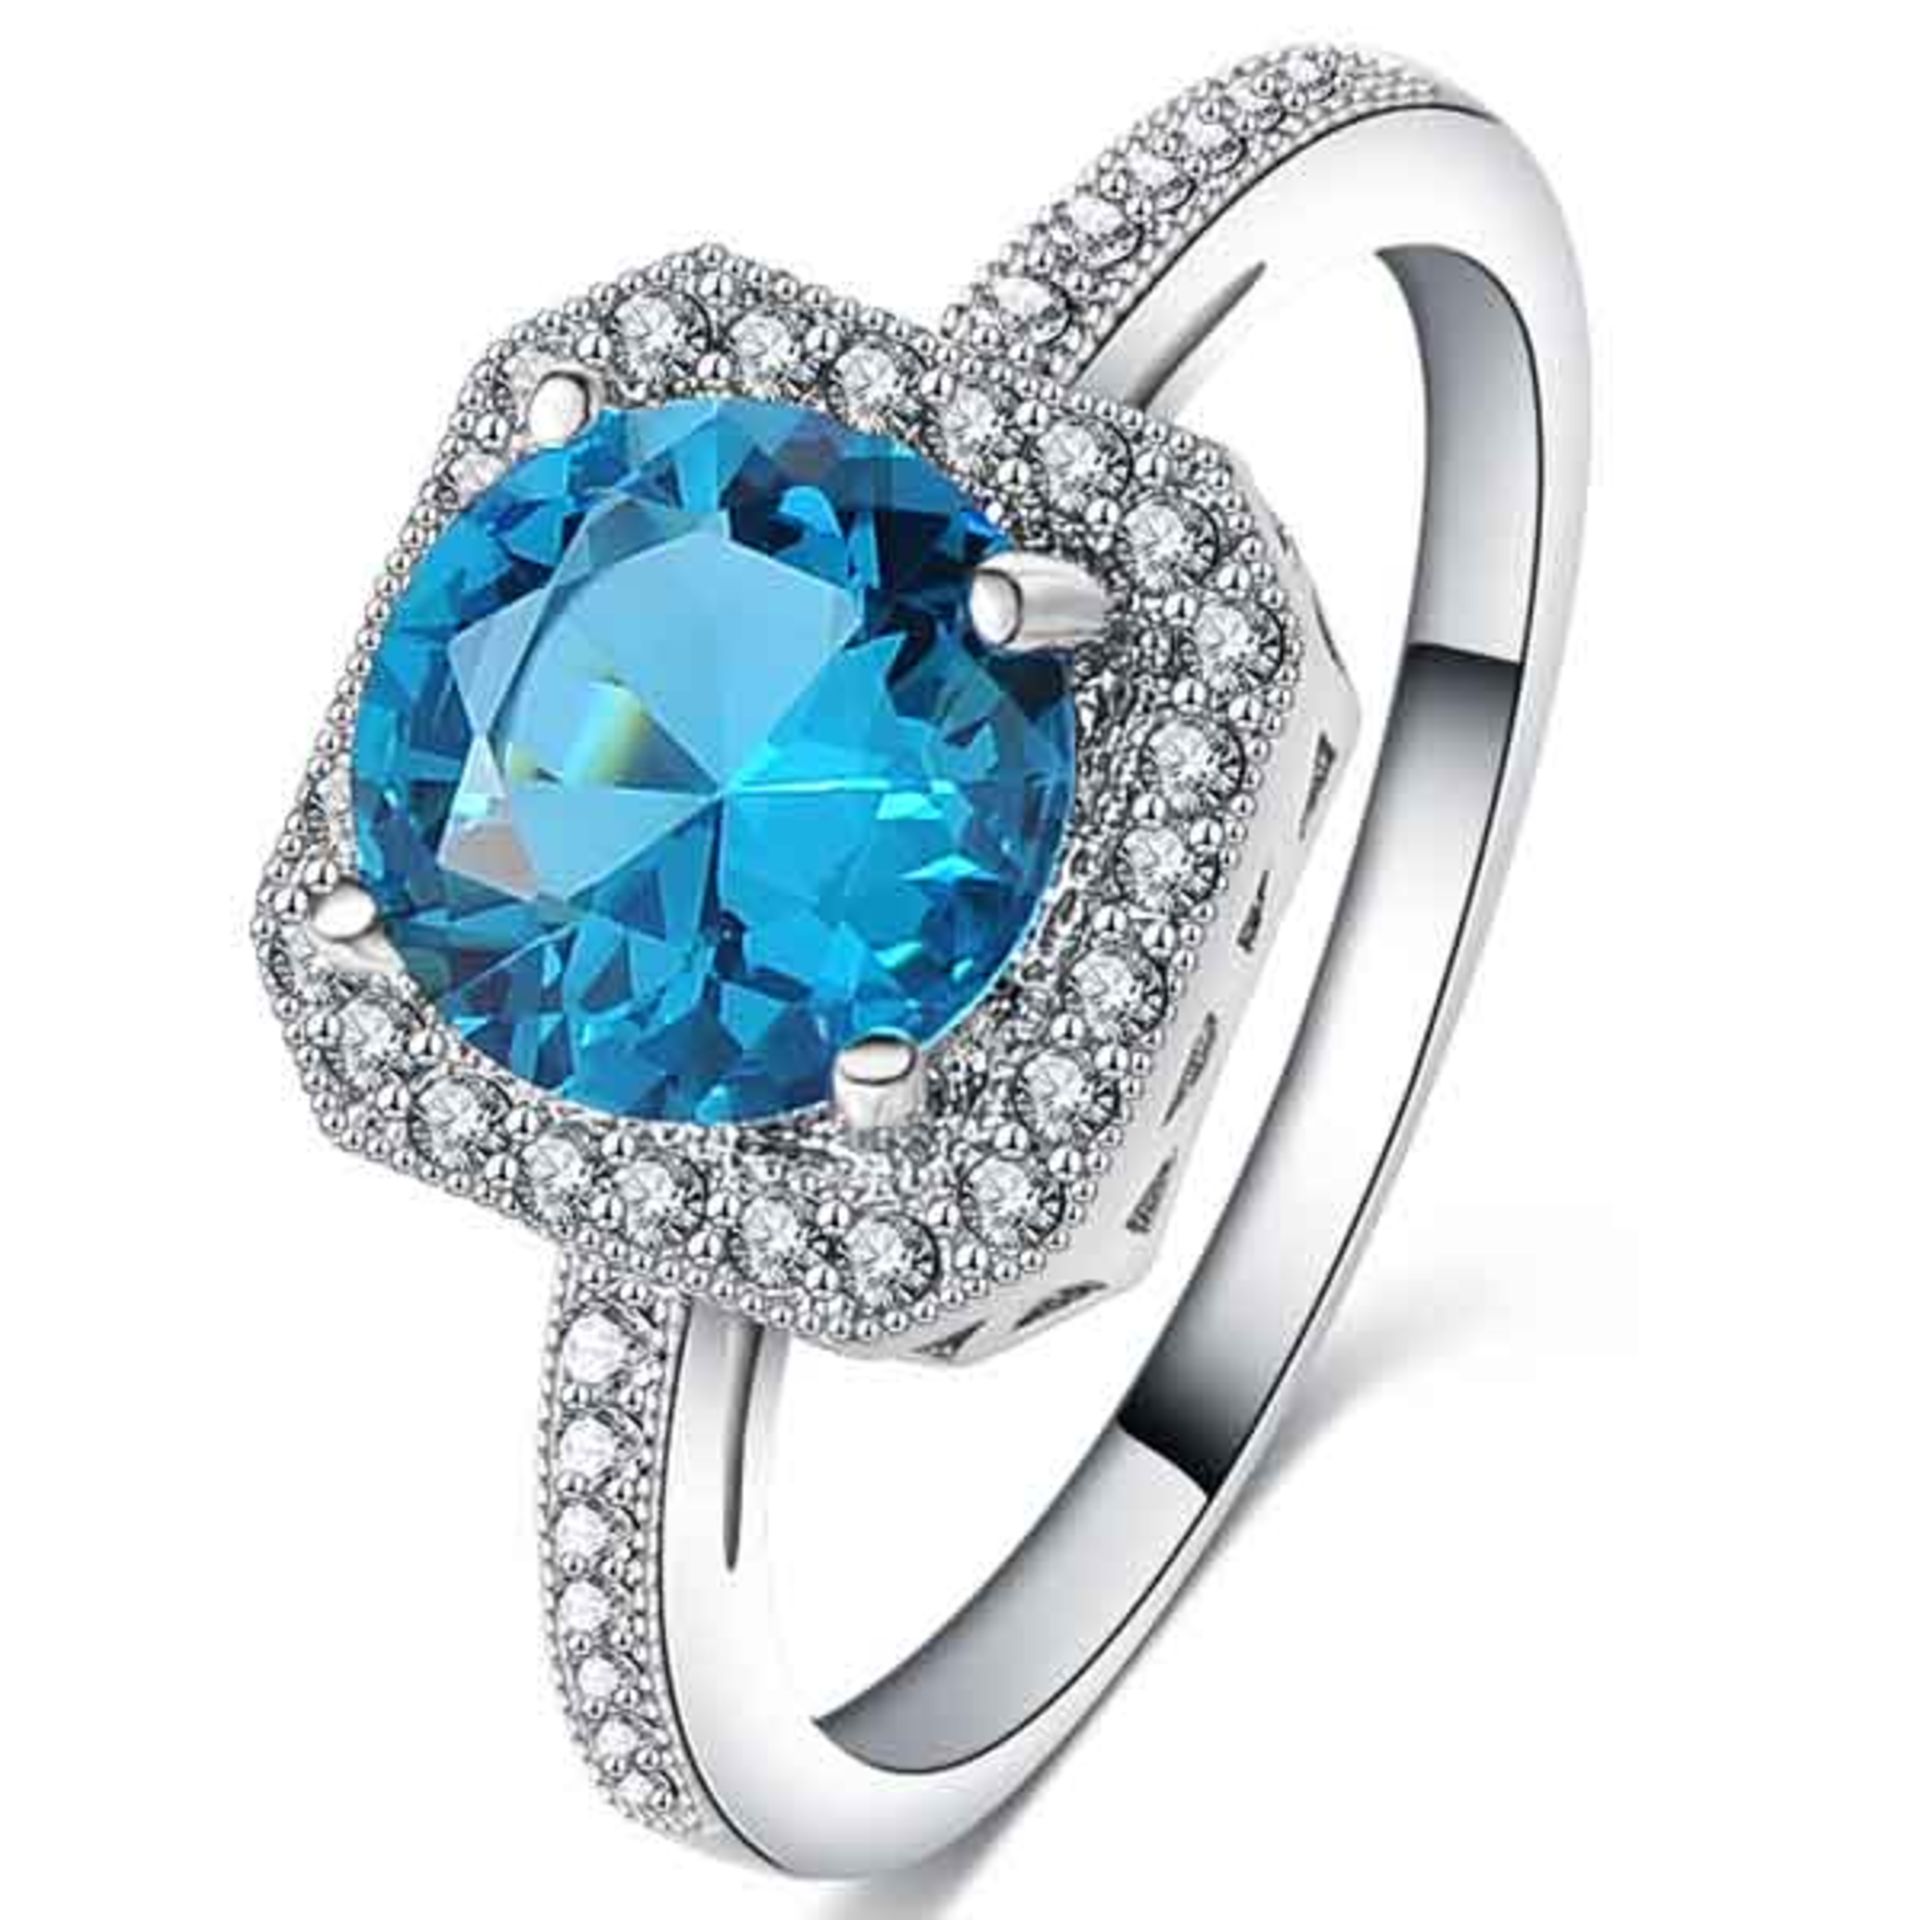 V Brand New Platinum Plated Blue Crystal Cocktail Ring X 2 YOUR BID PRICE TO BE MULTIPLIED BY TWO